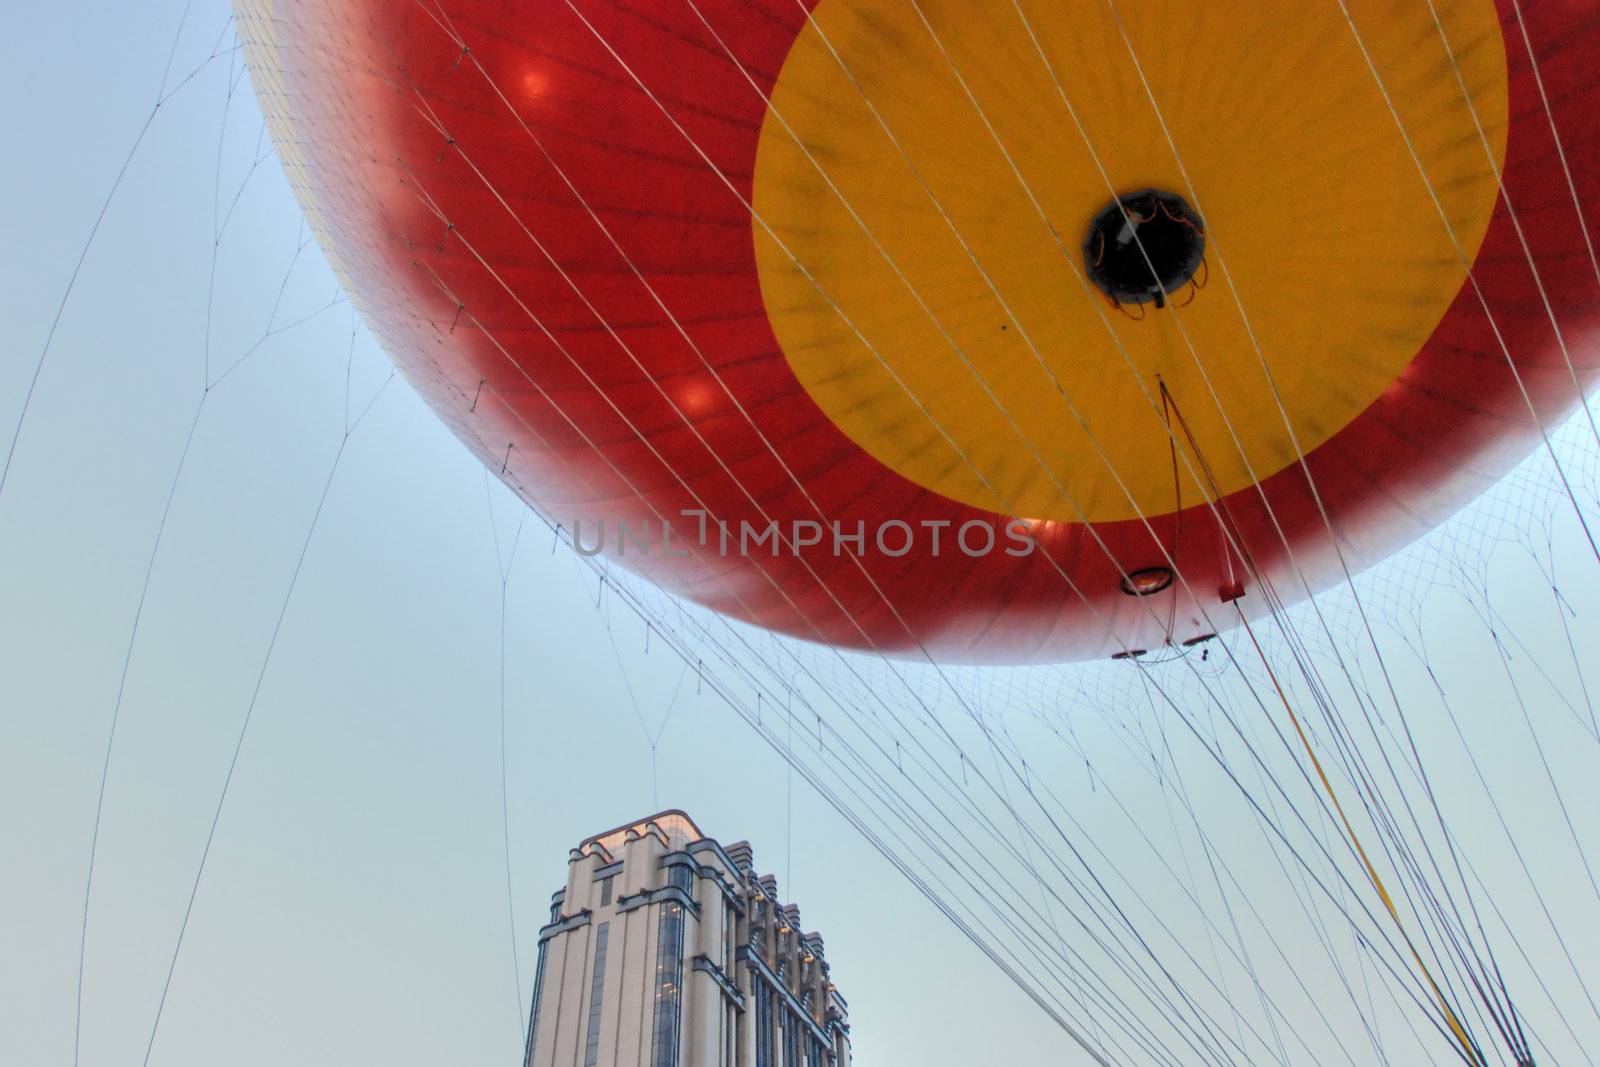 Hot-Air Balloon in Downtown Singapore, August 2007 by jovannig